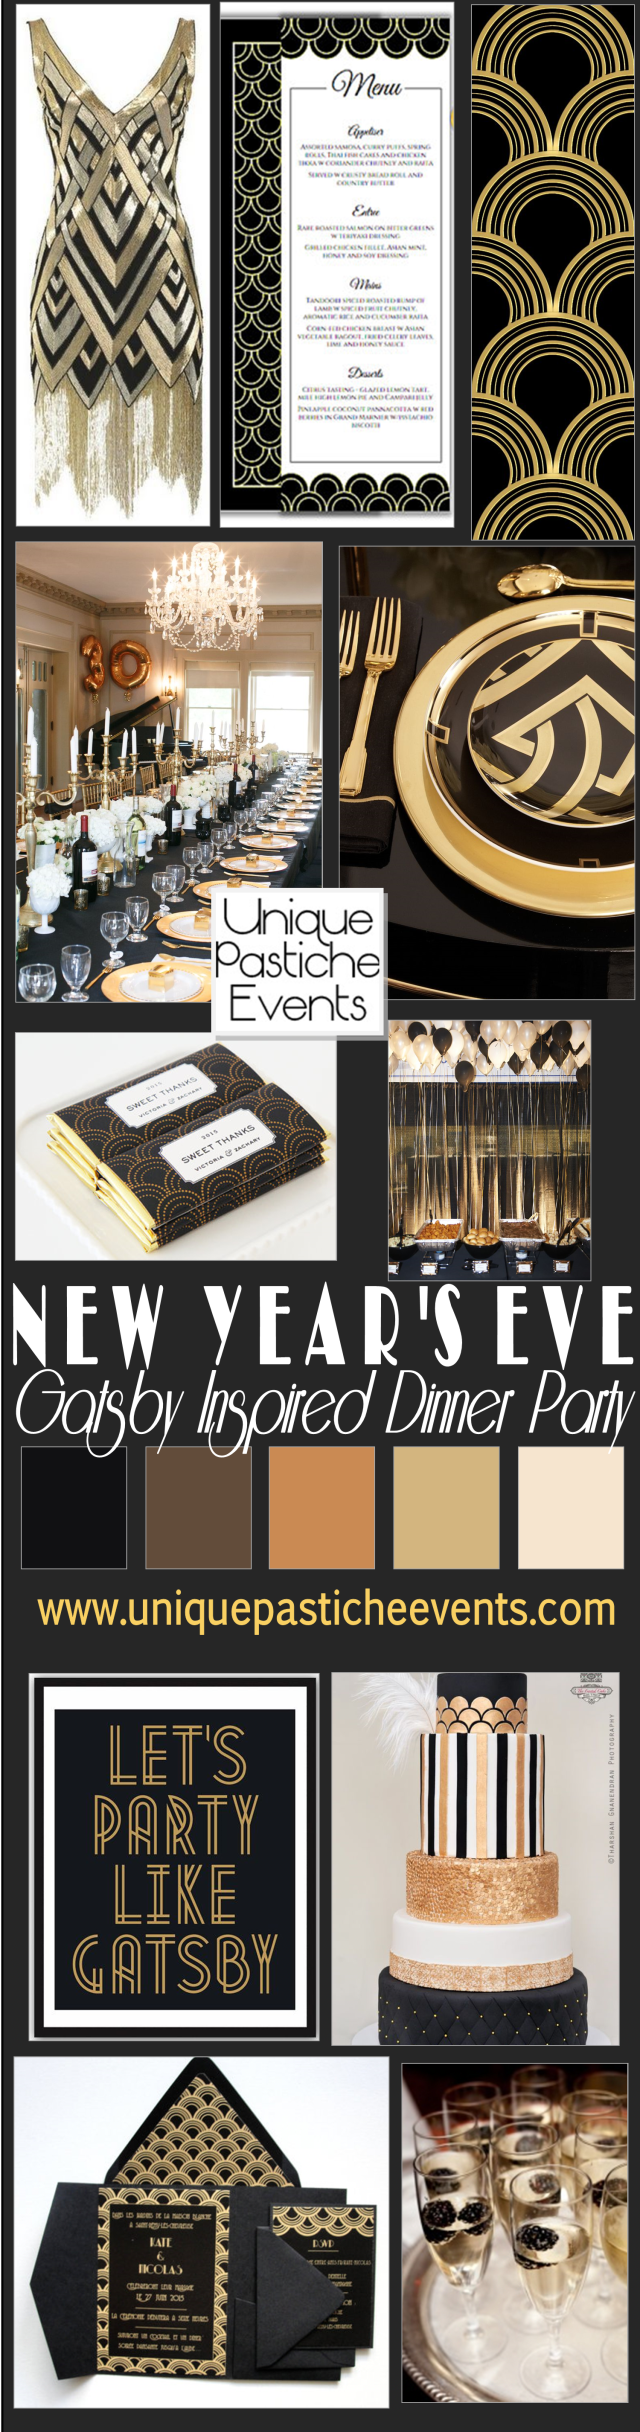 Gatsby Inspired New Year’s Eve Dinner Party Ideas